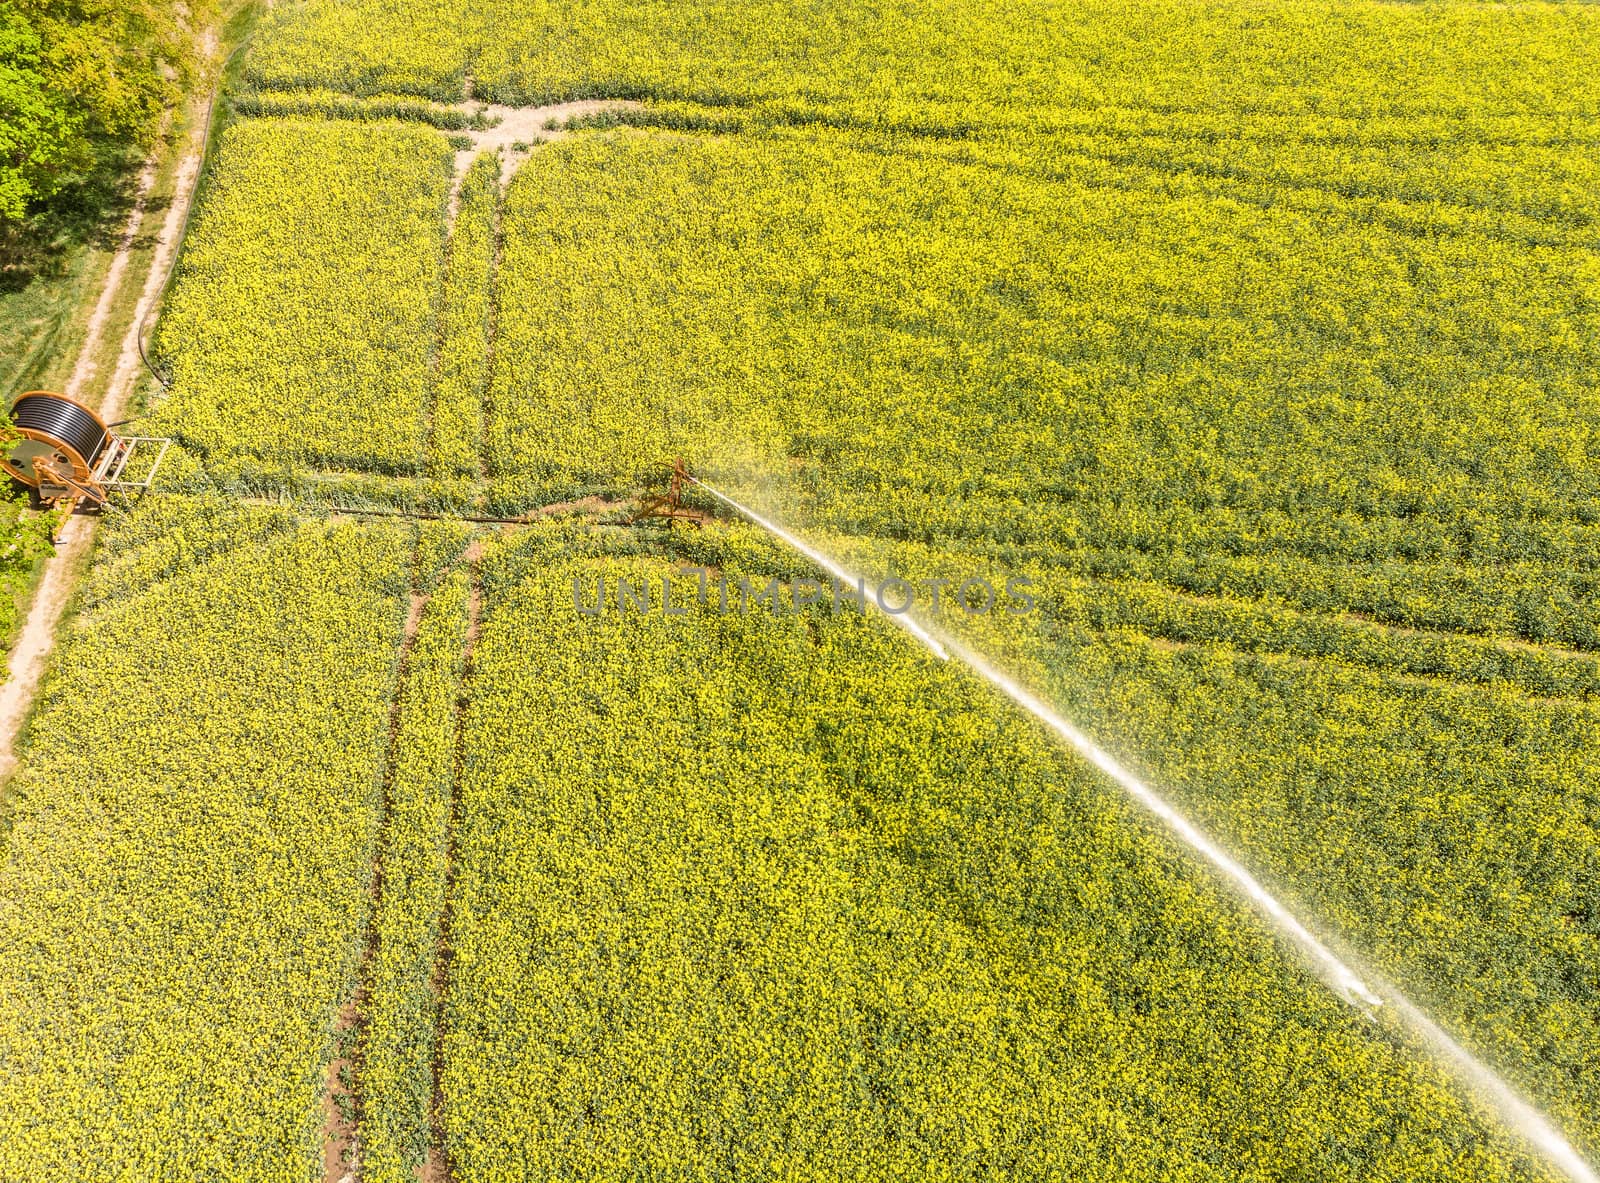 Aerial view from the sprinkler system to supply the plants with water from a blooming field with oilseed rape (Brassica napus), germany